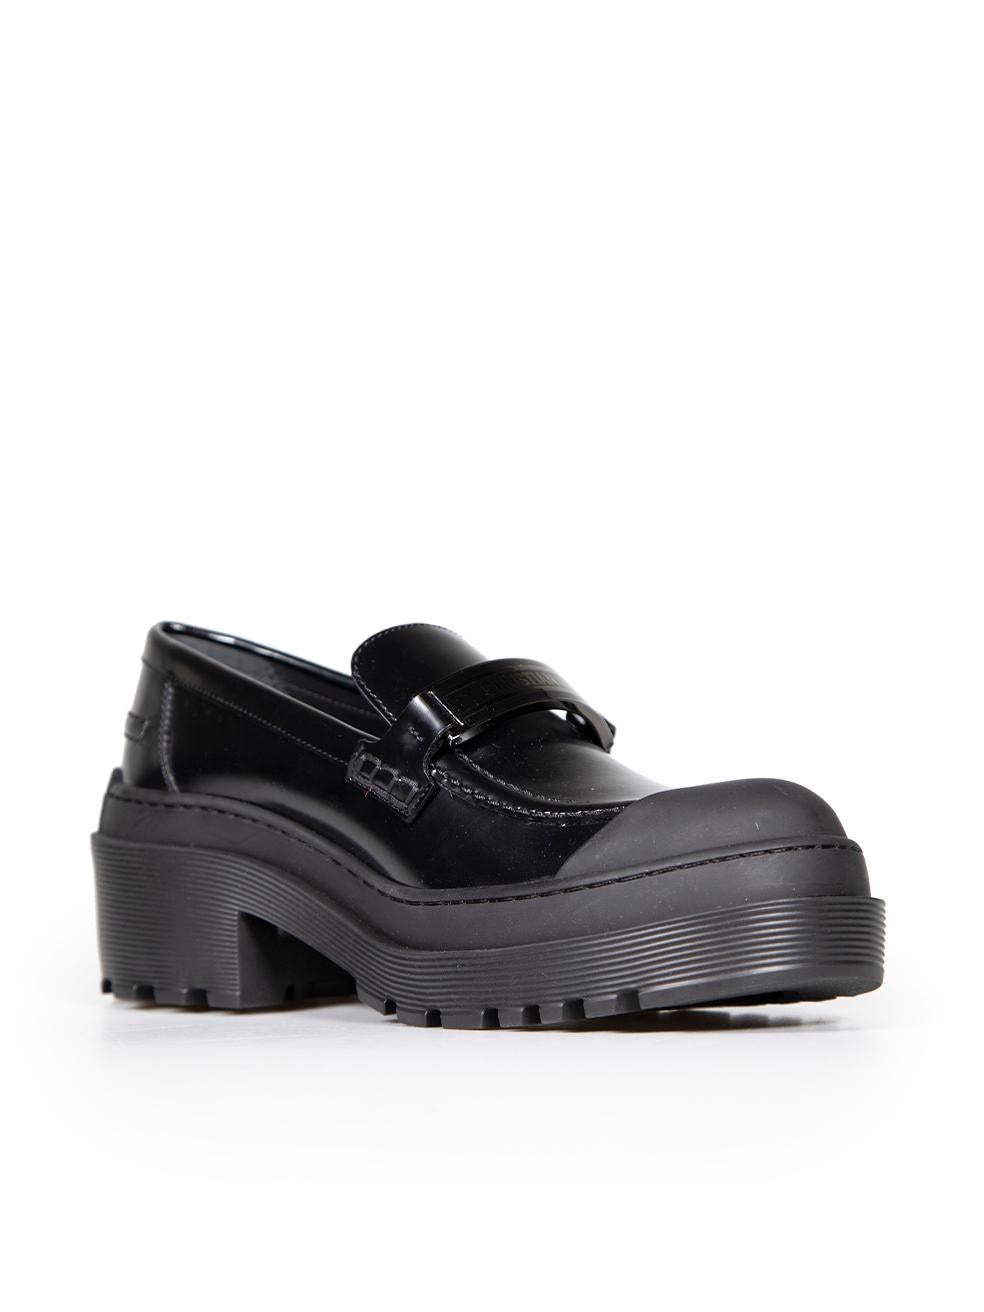 CONDITION is Never worn. No visible wear to loafers is evident however residue from foam inserts can be felt in the insoles of this new Dior designer resale item.
 
 
 
 Details
 
 
 Black
 
 Leather
 
 Loafers
 
 Platform
 
 Low heel
 
 Round toe
